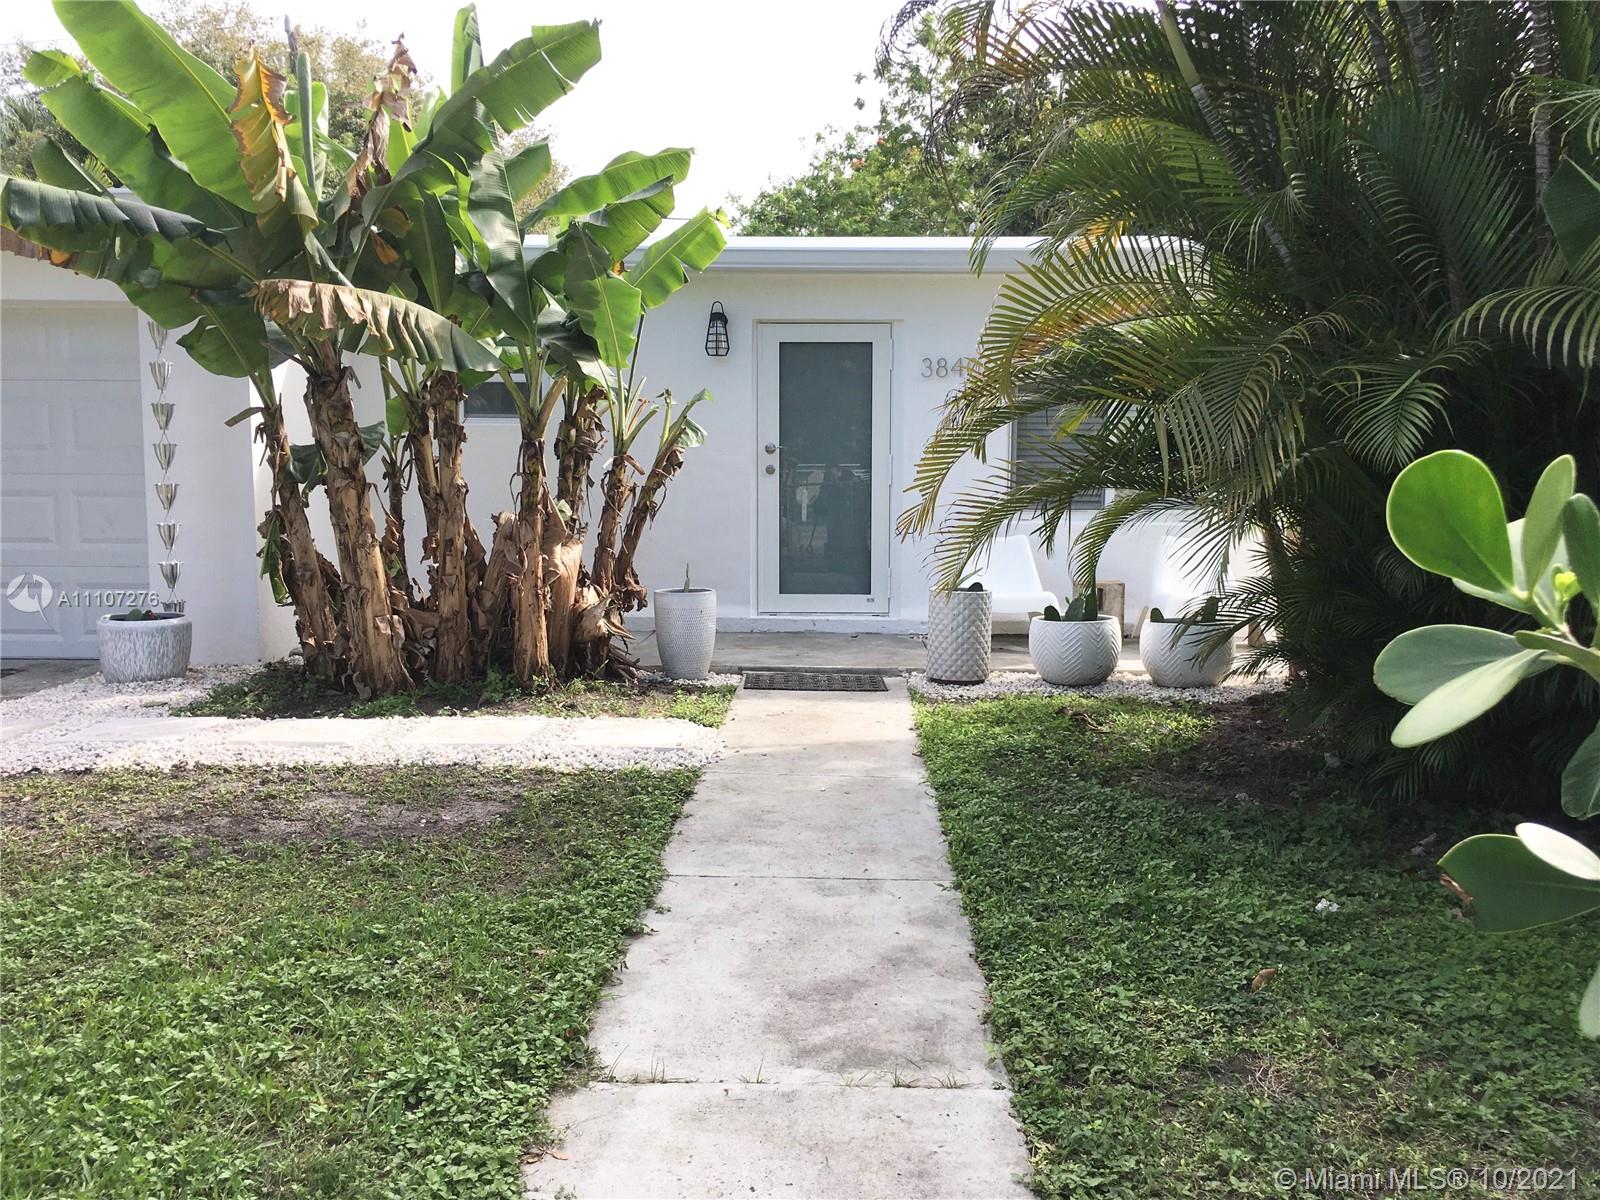 Looking for an affordable move-in ready home in Miami’s hottest neighborhood Coconut Grove or a profitable income producing investment property with huge future potential or for a great land opportunity to build a new home or townhome? With a 6,000 SF lot, this renovated 3 bed, 3 bath home checks all of those boxes and more.  Located just a mile from all the great shops, restaurants, entertainment and waterfront parks in Coconut Grove’s village center, within walking distance to top public schools with acclaimed International Studies programs, less than a mile to the Metrorail (one stop to UM), and just 5 miles from Brickell/Downtown Miami.  Must be purchased with adjacent property 3850 Charles Ter for $1,500,000. **DO NOT DISTURB TENANTS**